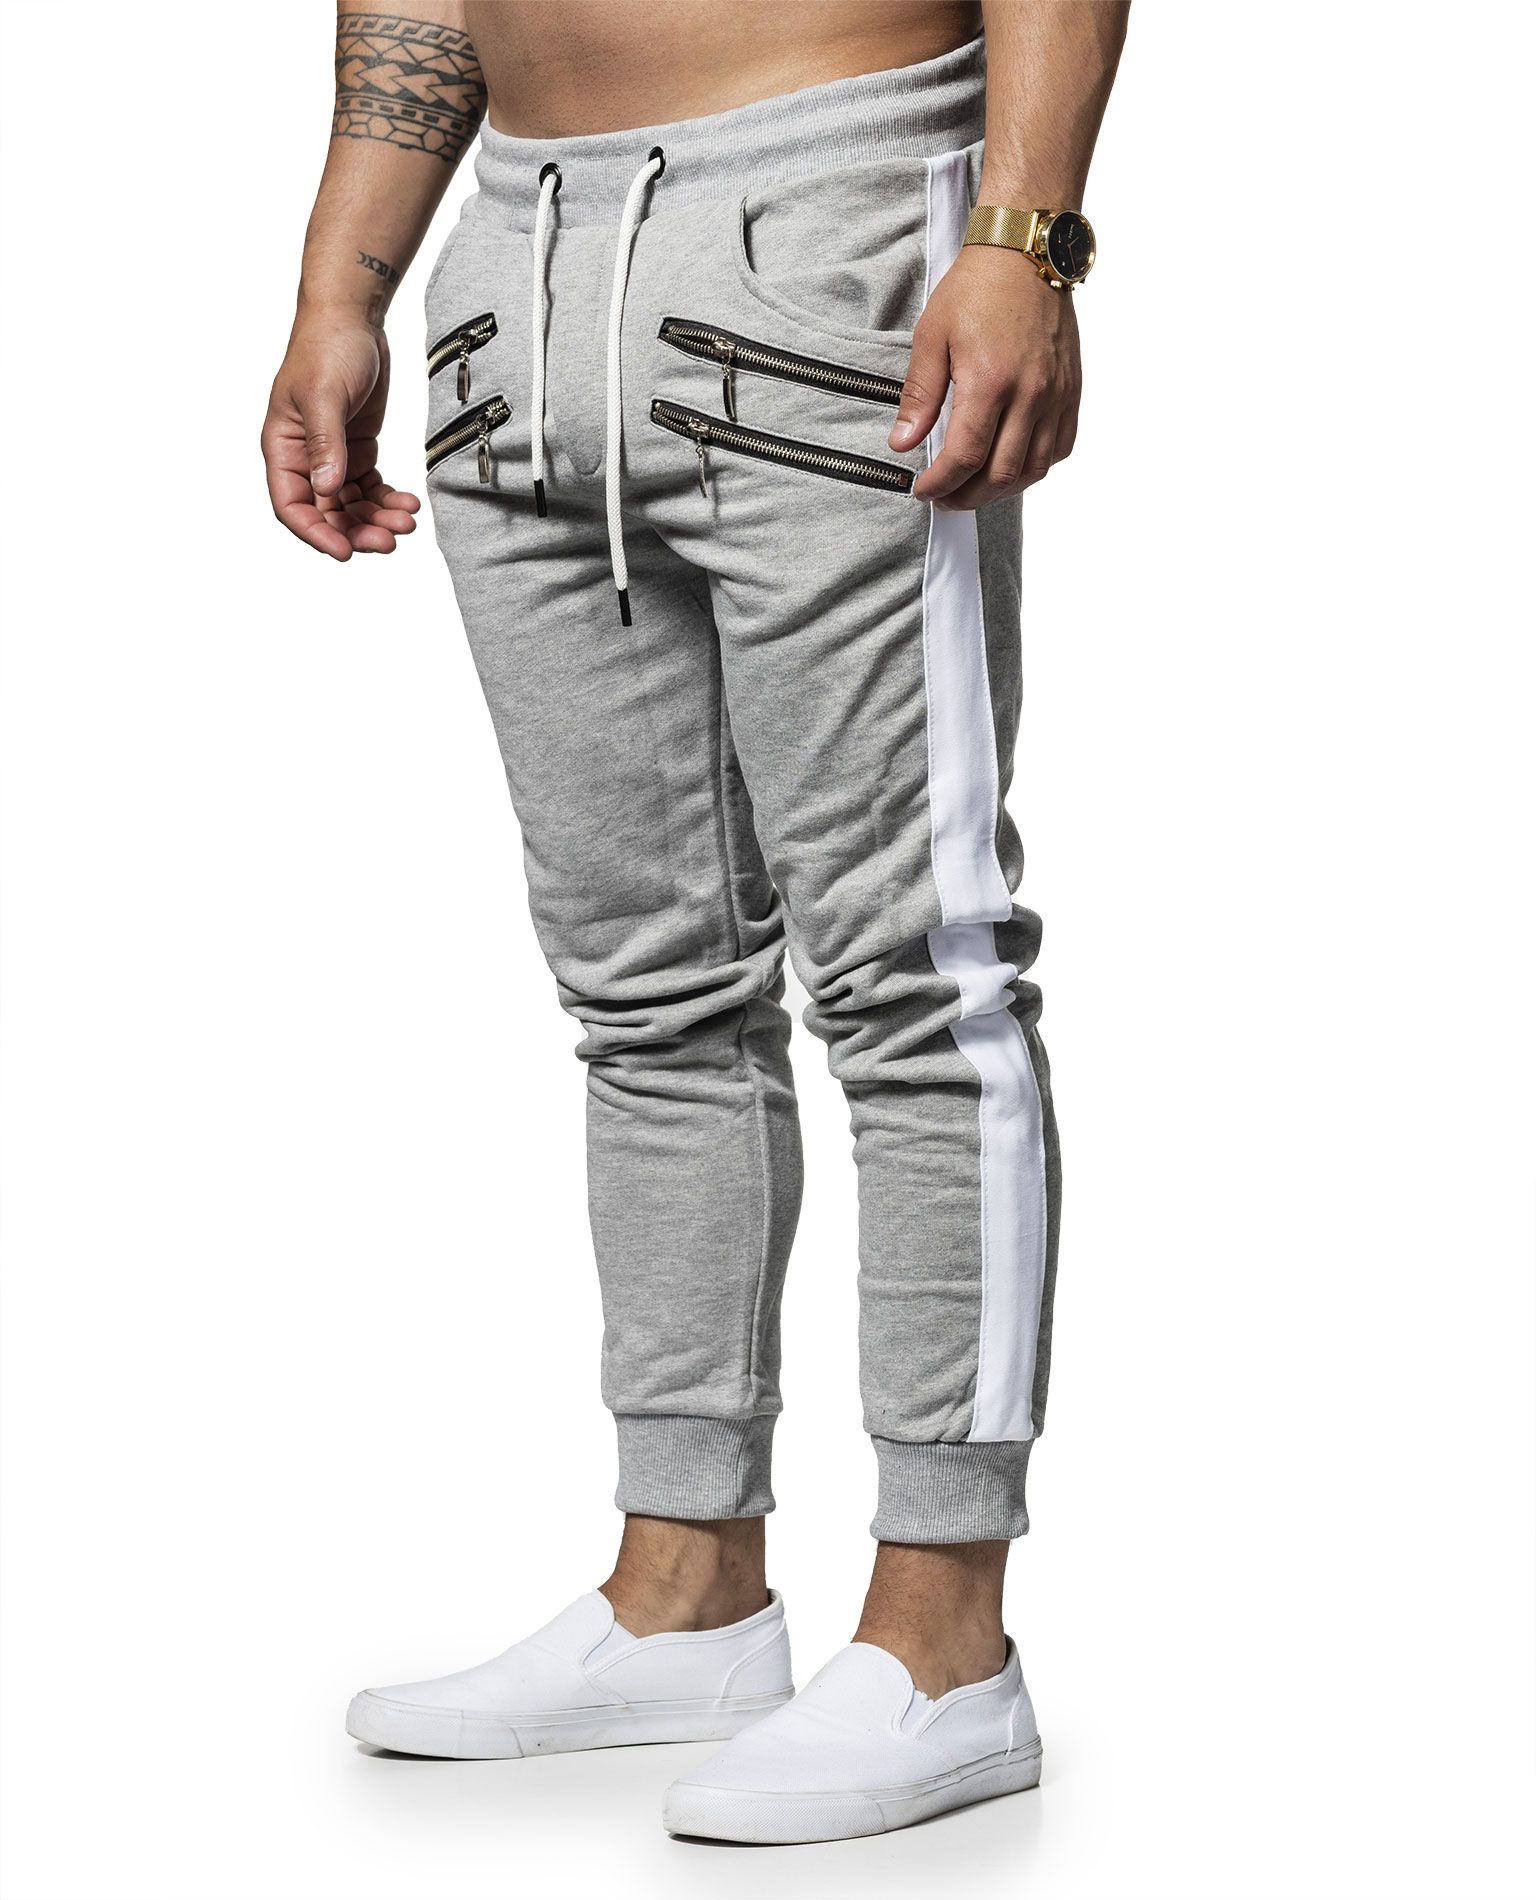 Ted College Pants Gray Jerone - 1313 - Trousers - Jerone.com